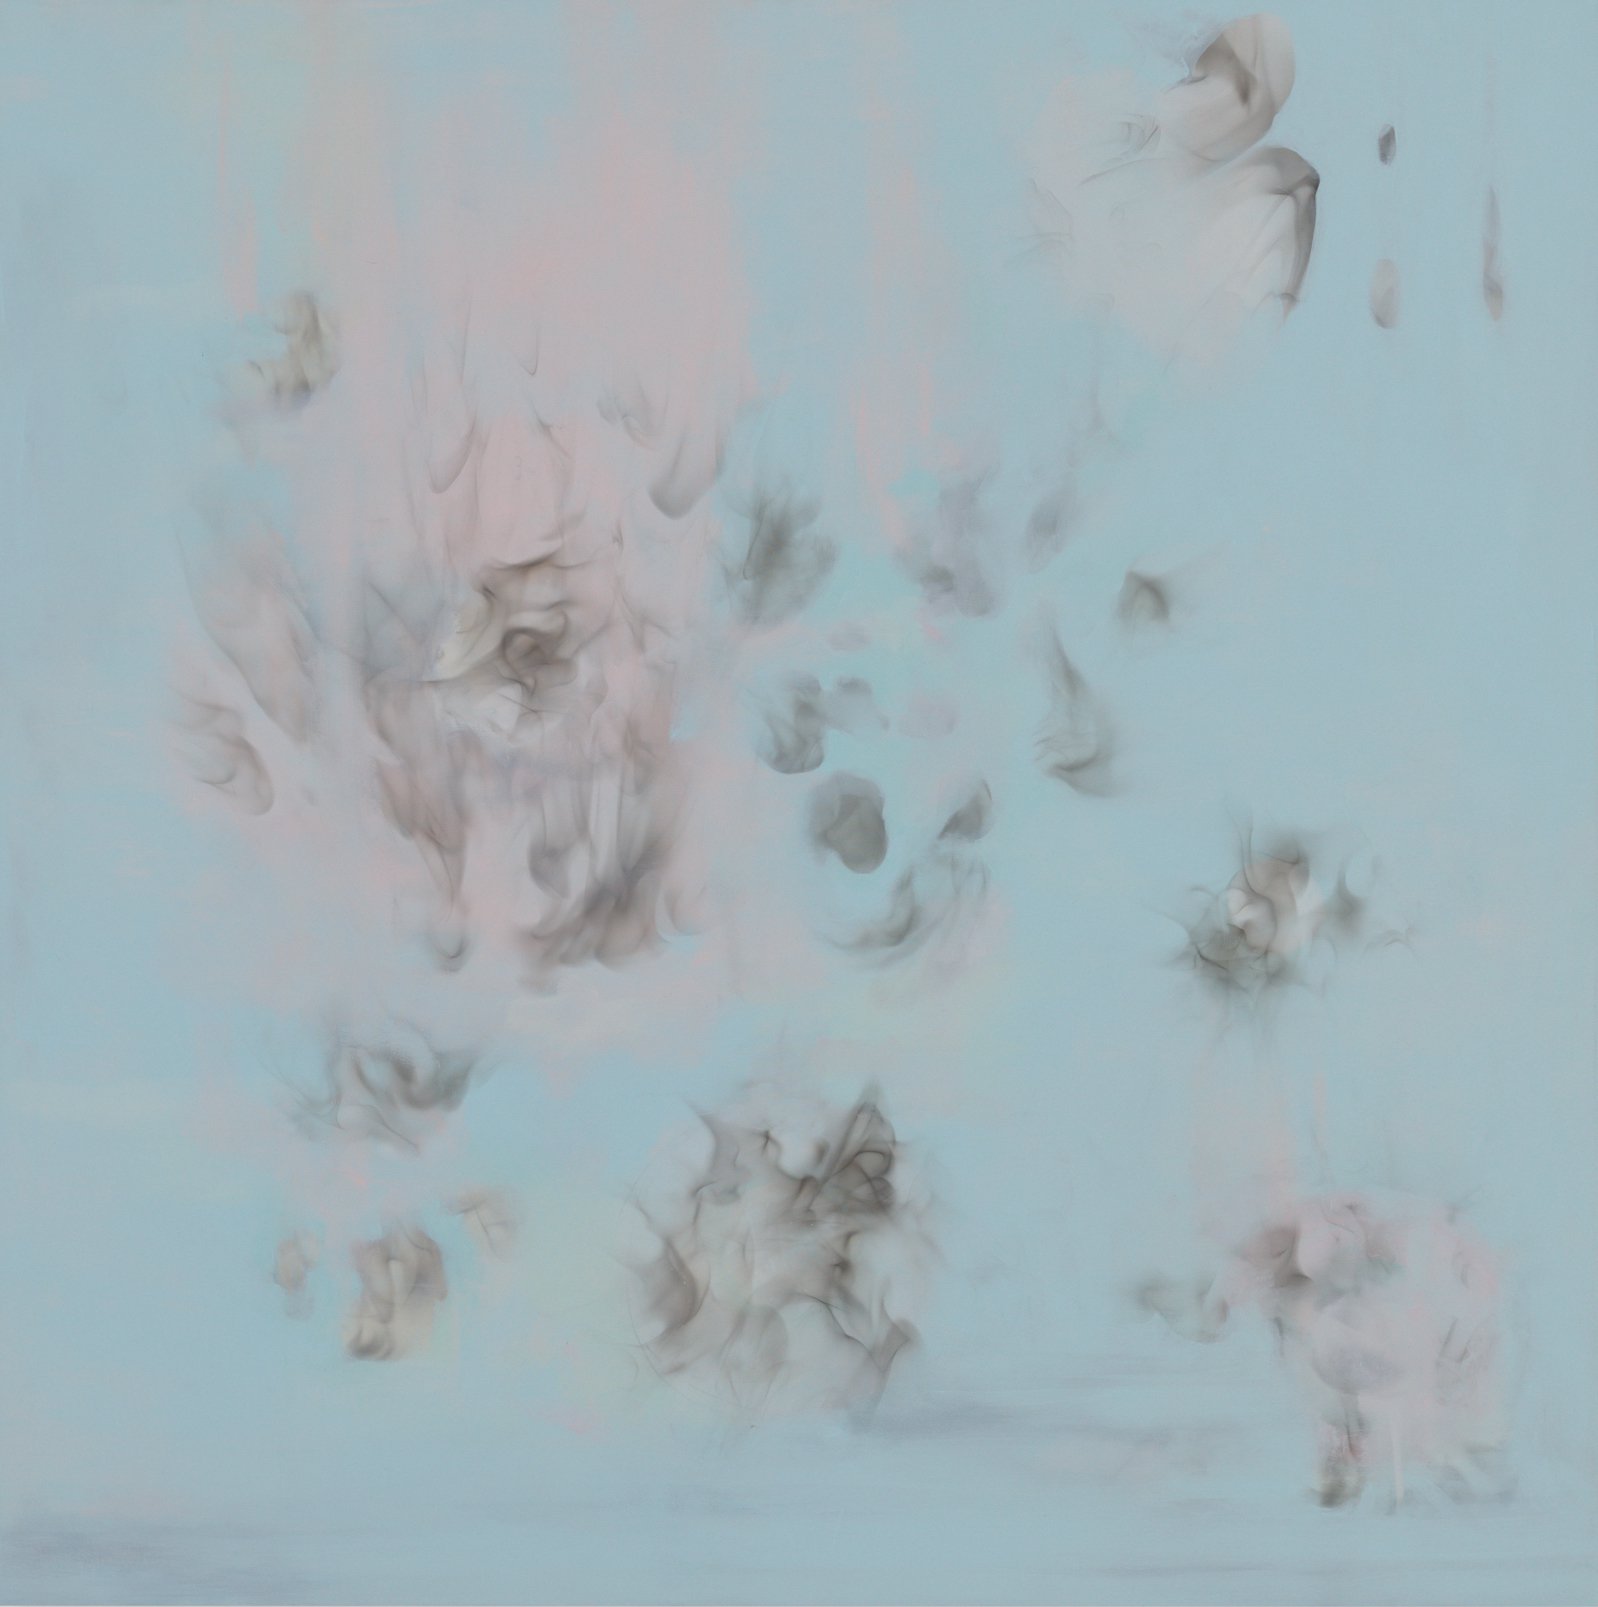 Eftihis Patsourakis, Untitled, oil, acrylic and smoke on canvas, 118 x 118 x 4 cm (46 1/2 x 46 1/2 x 1 5/8 in), 2022